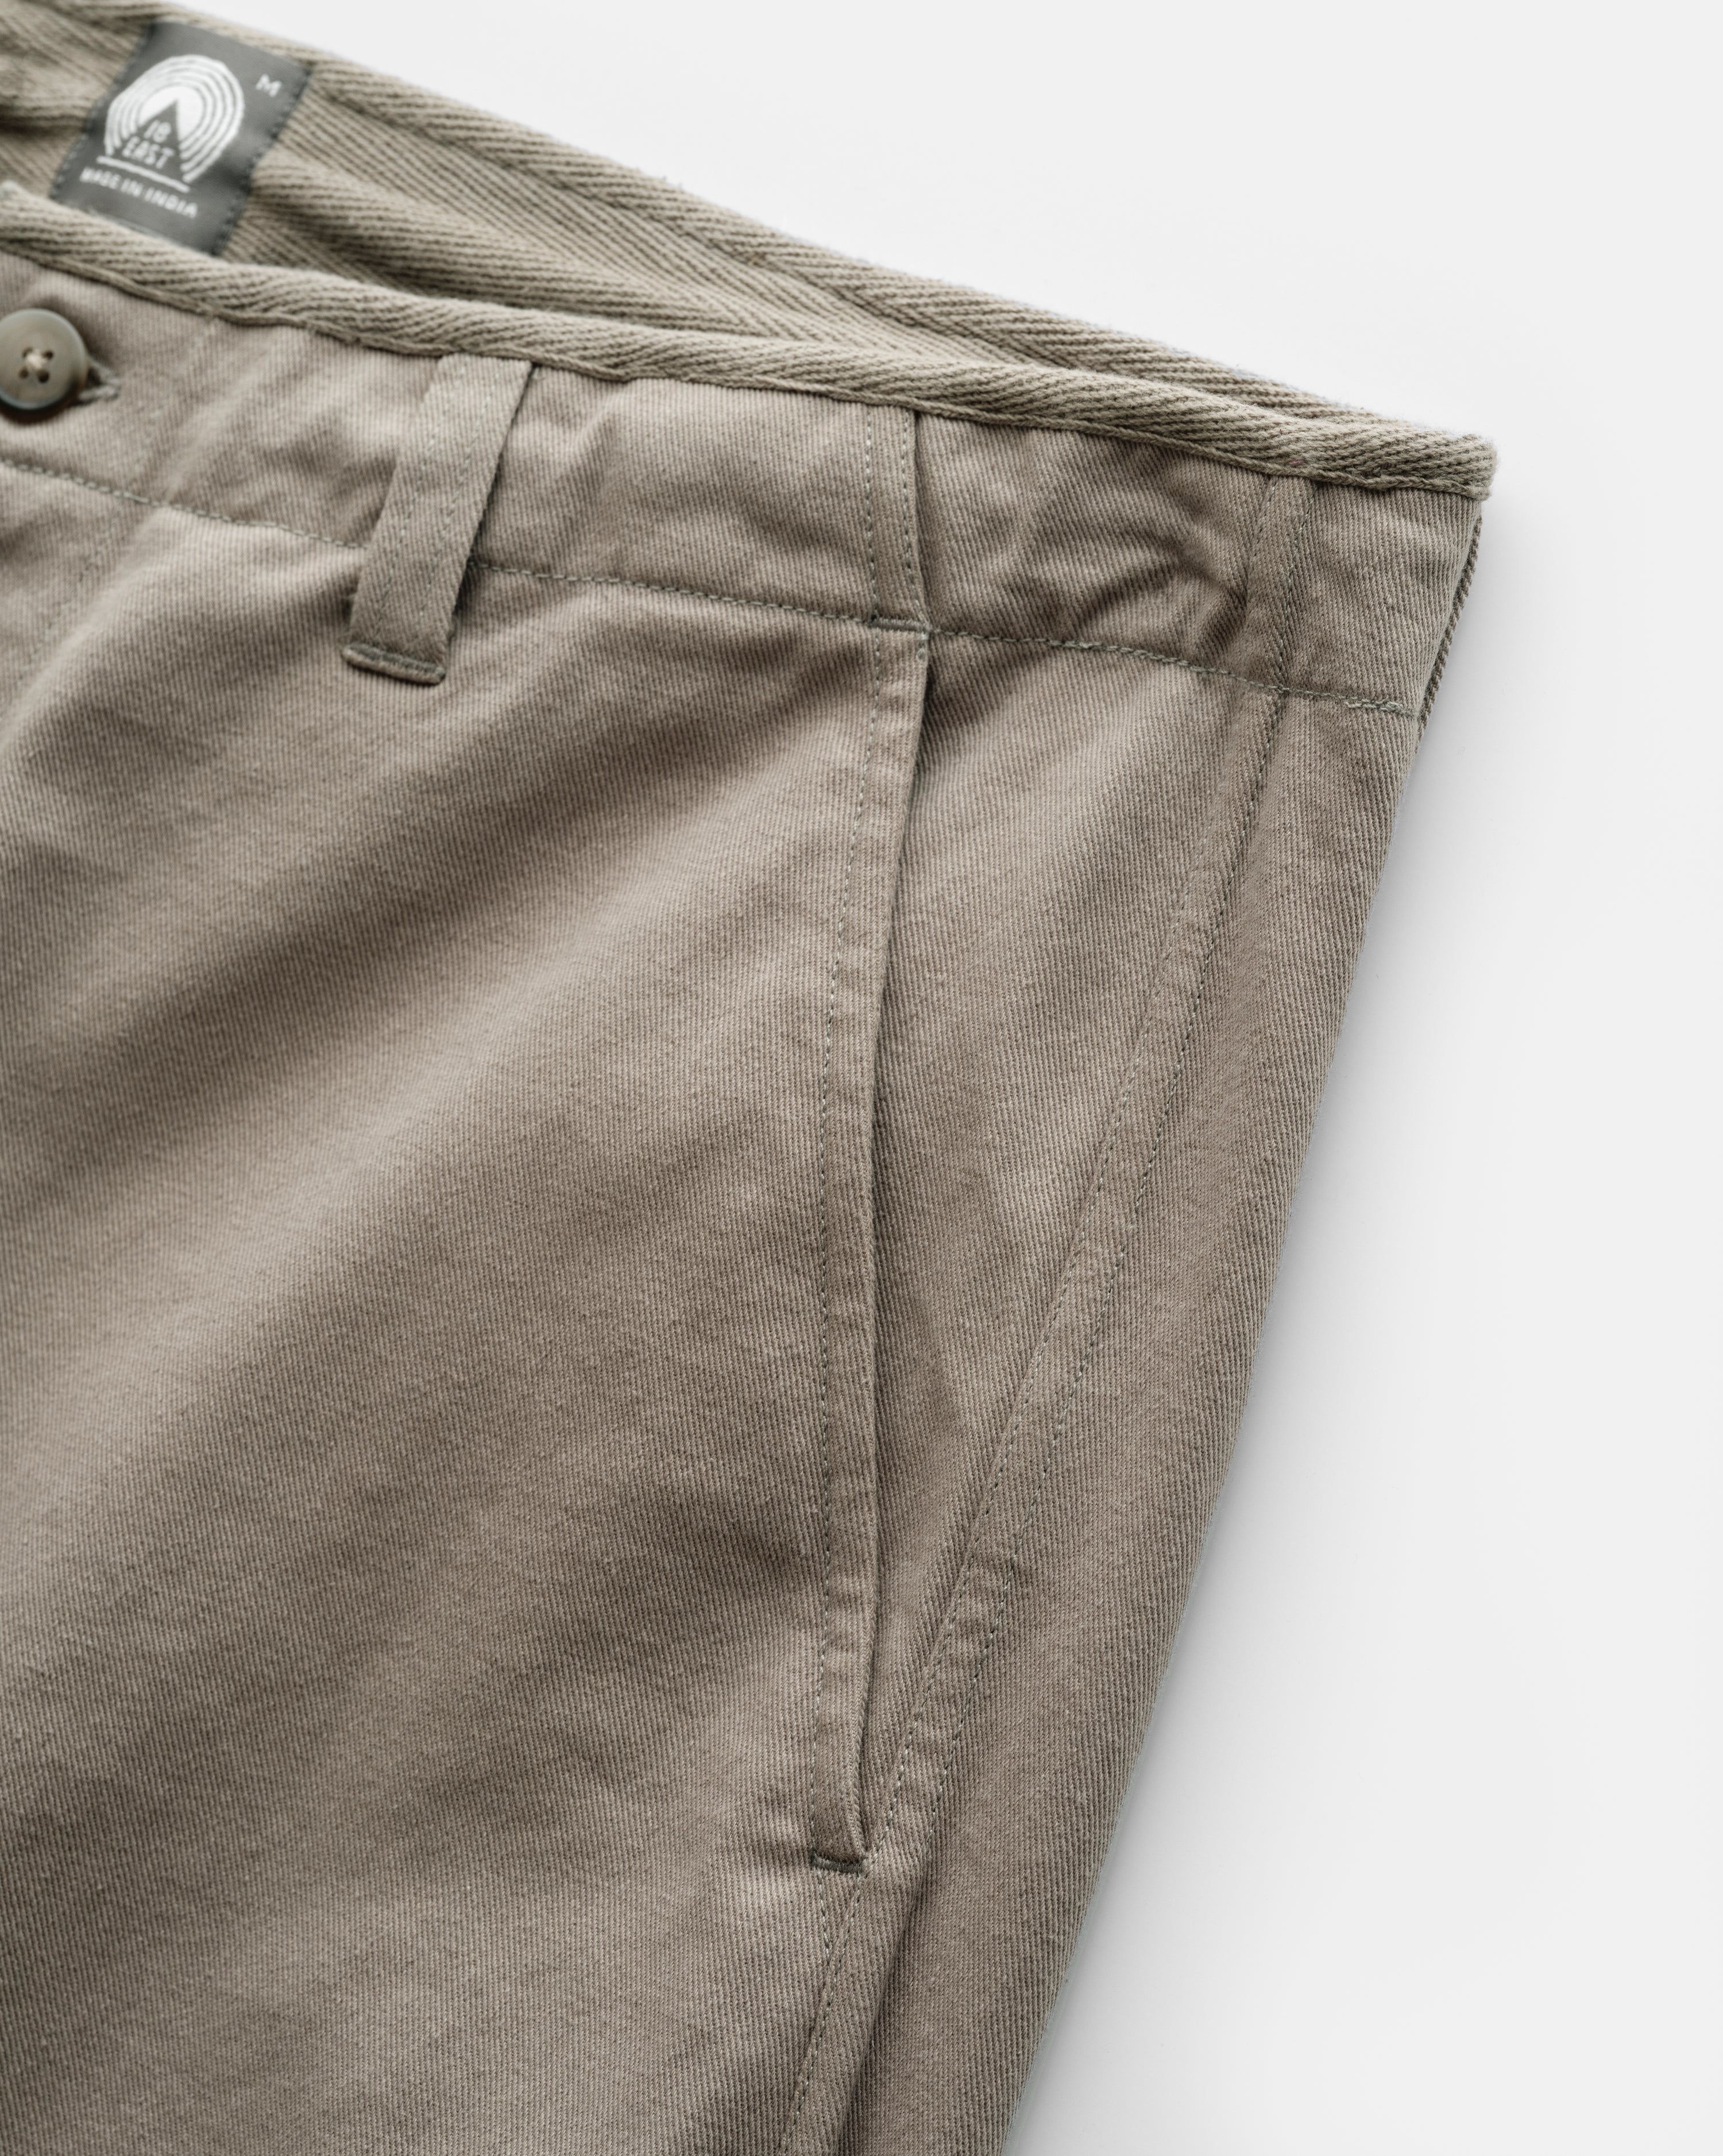 SHELTER PANT - PLAZA TAUPE HOMEGROWN TWILL